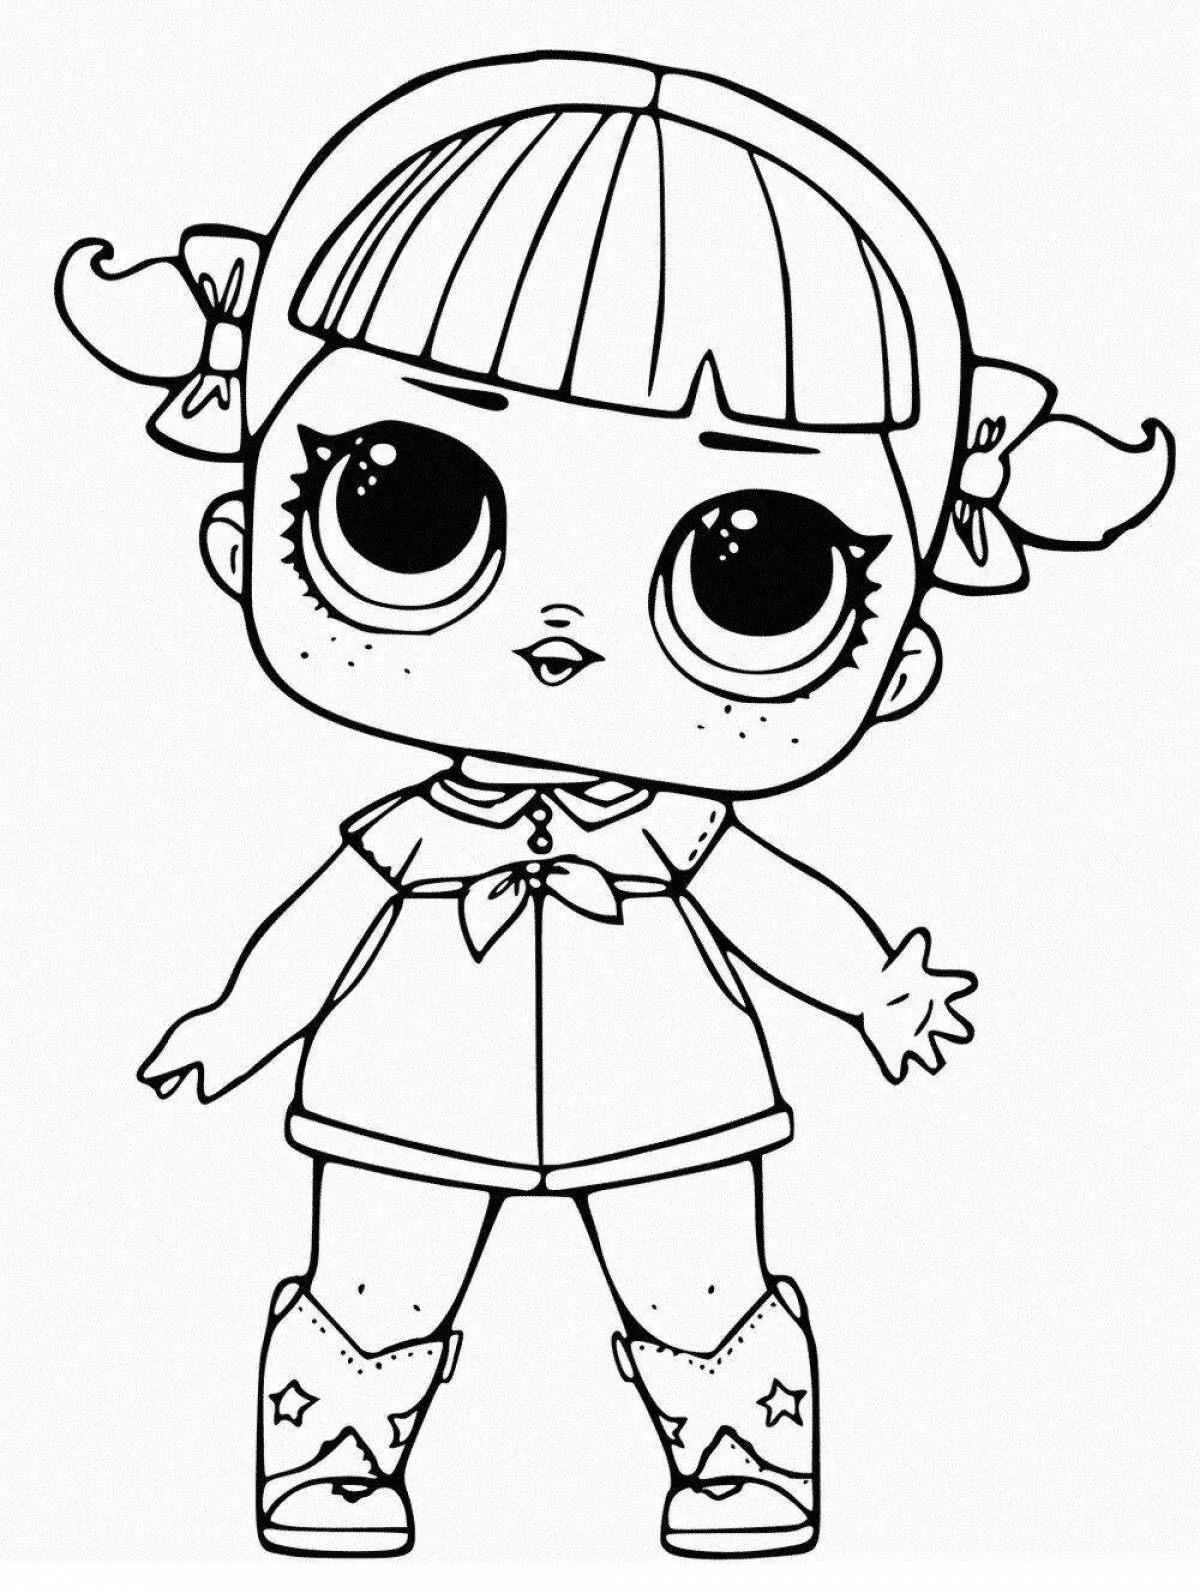 Jovial coloring page lol doll coloring book